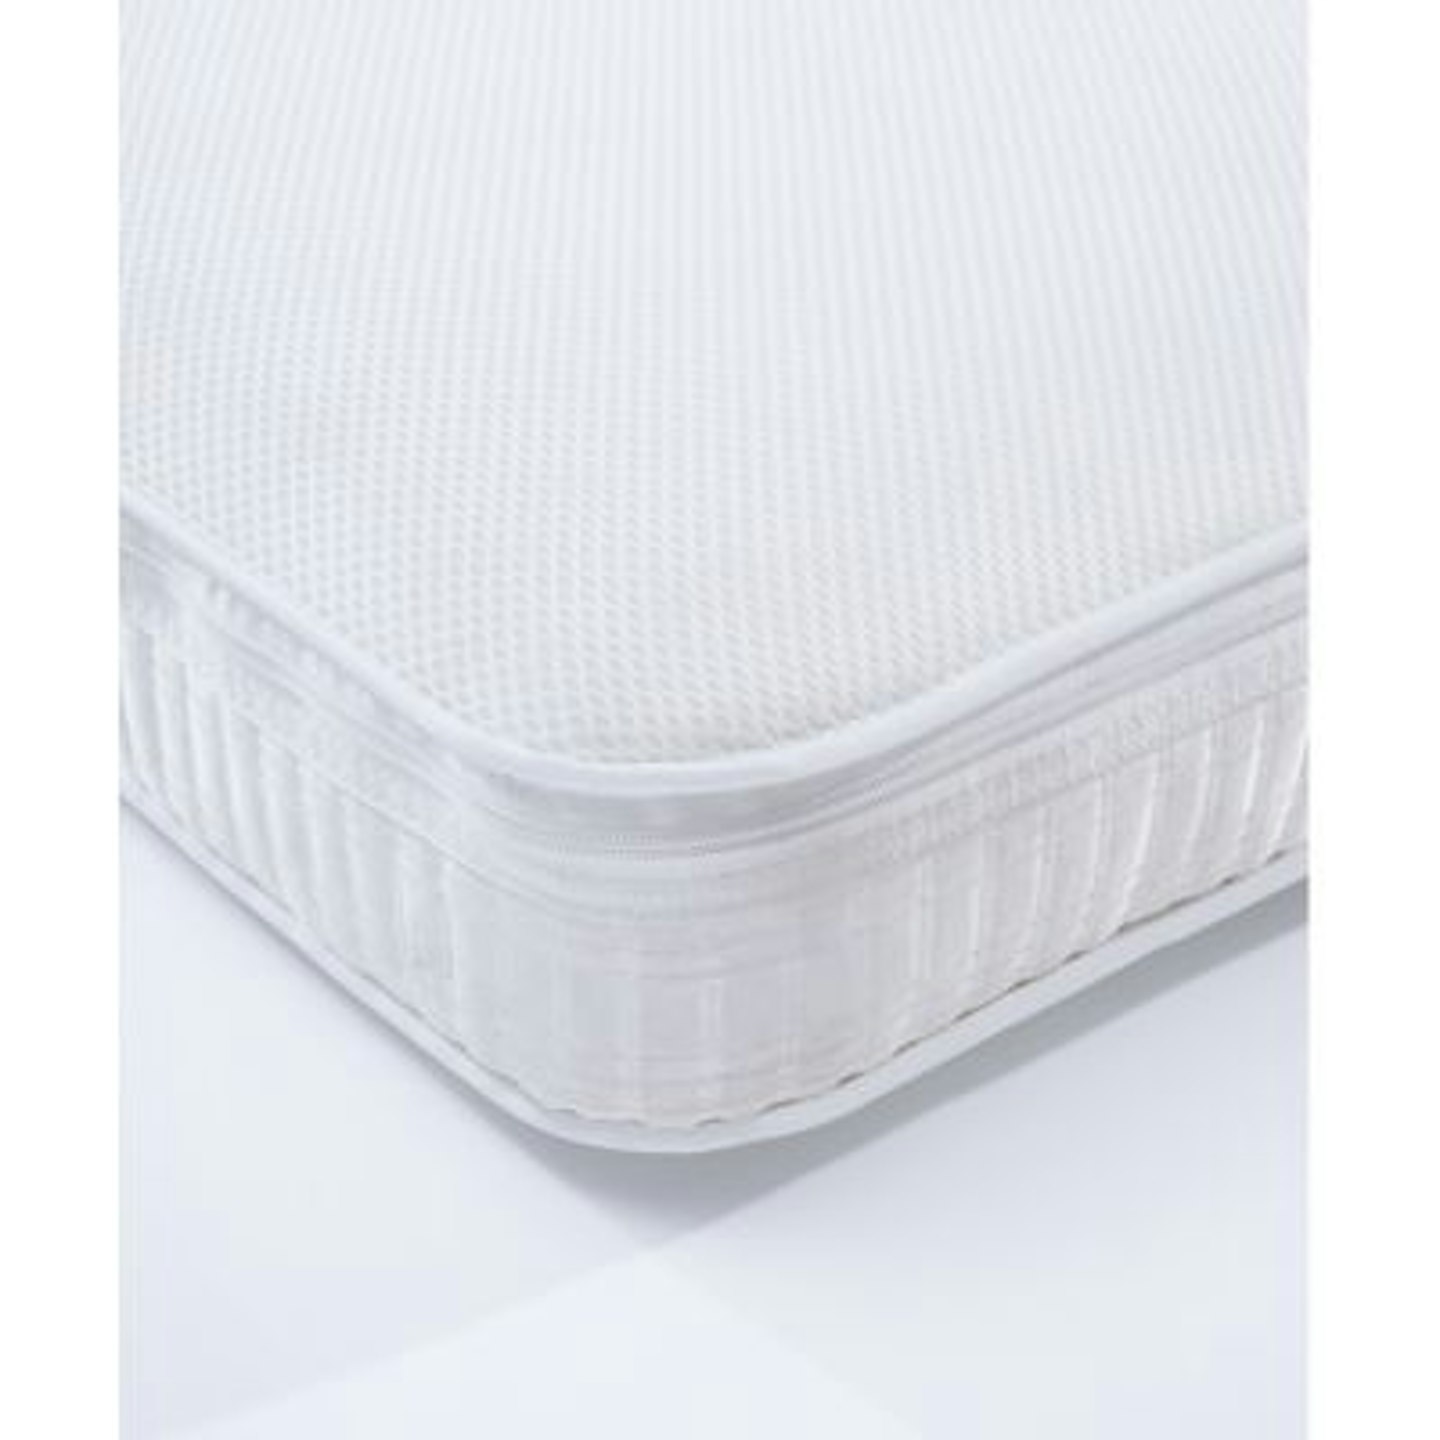 mothercare airflow pocket spring cot mattress review